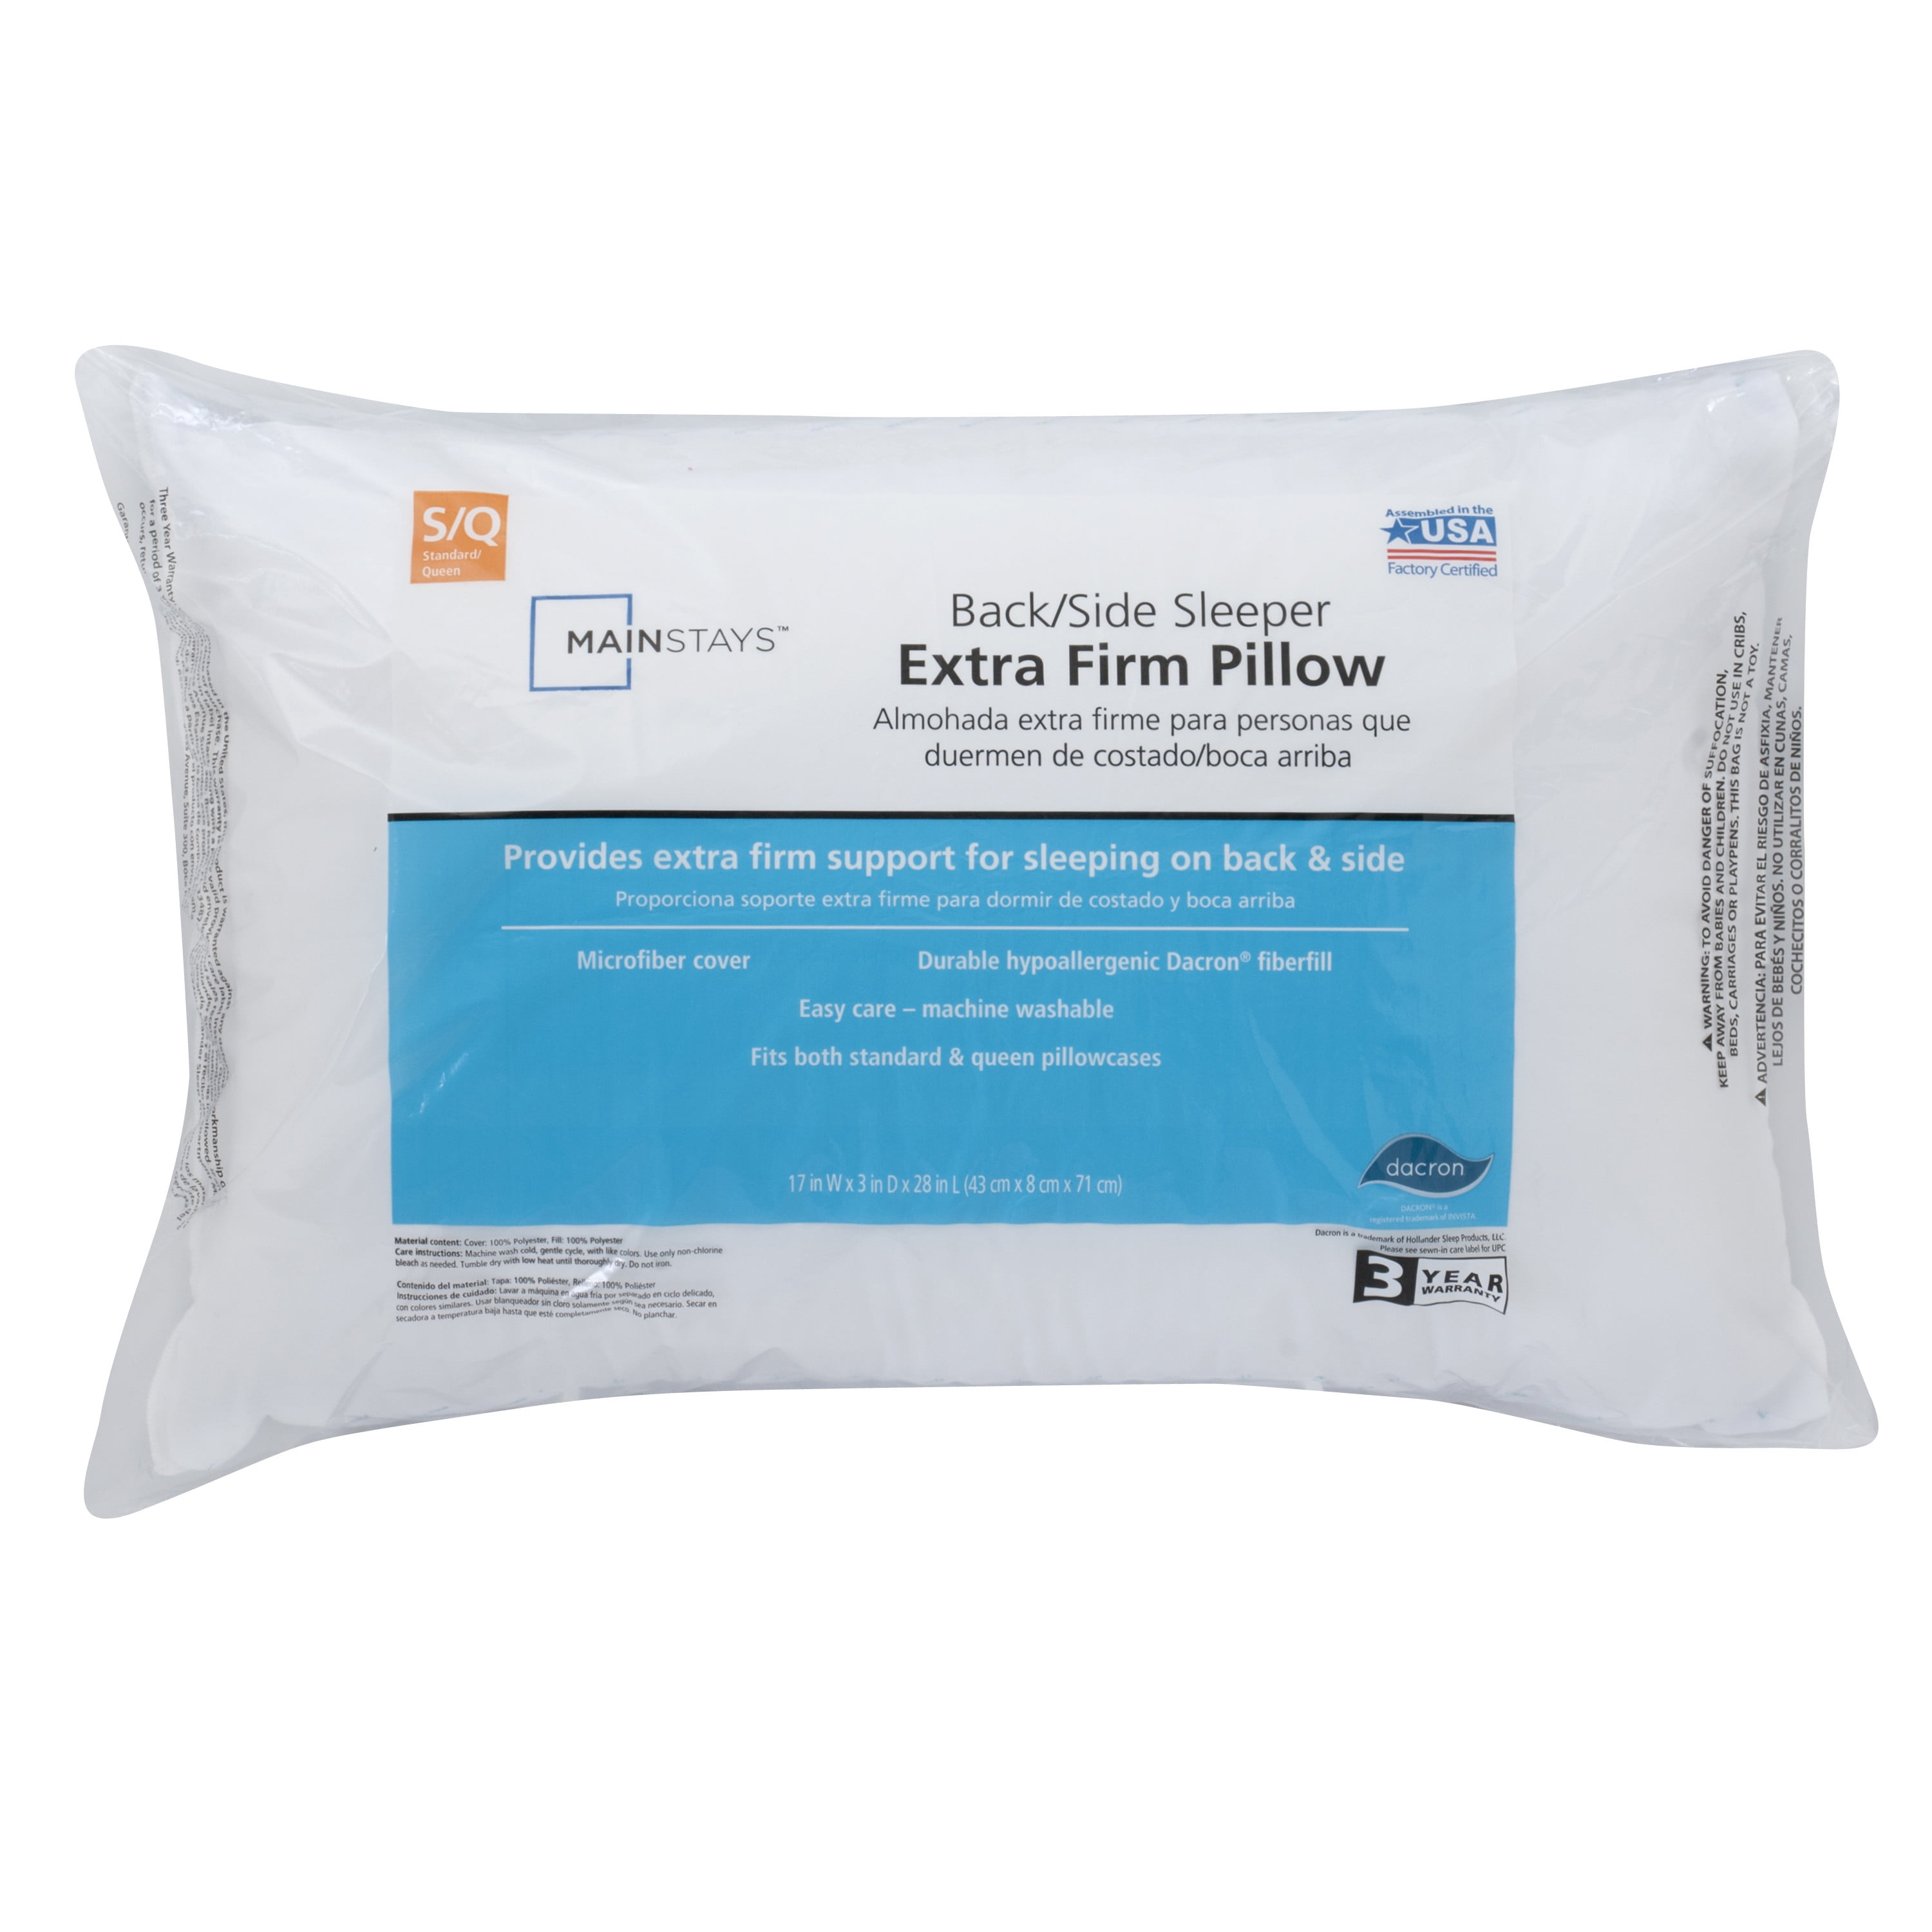 PILLOWS Deluxe Pair-2Big Superfirm Hollow-fiber Polyester Quilted Filled Pillows 